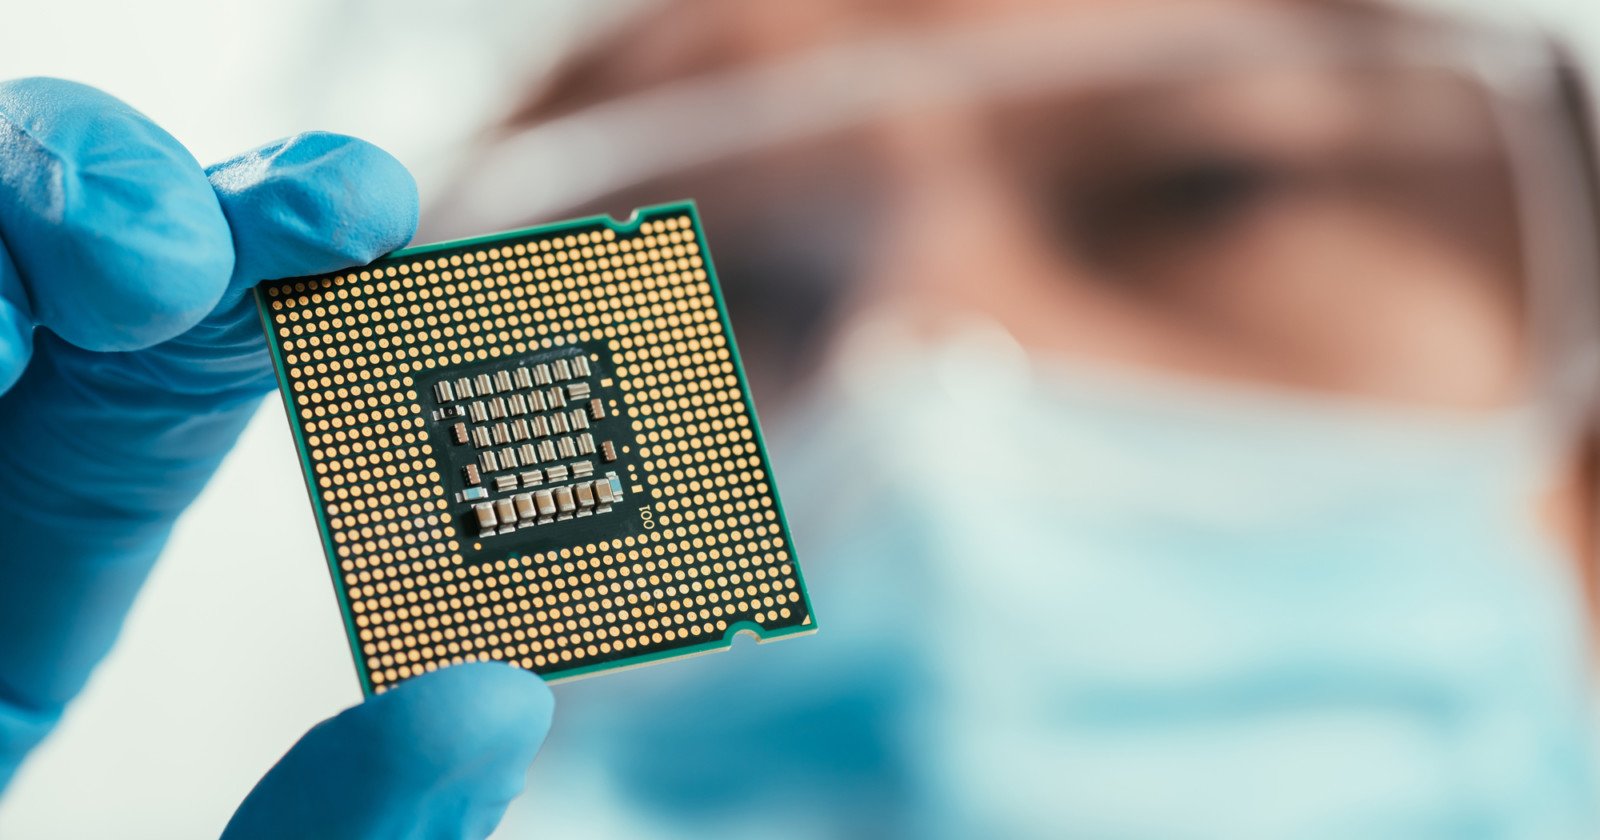 New Chip Can Process Nearly Two Billion Images Per Second